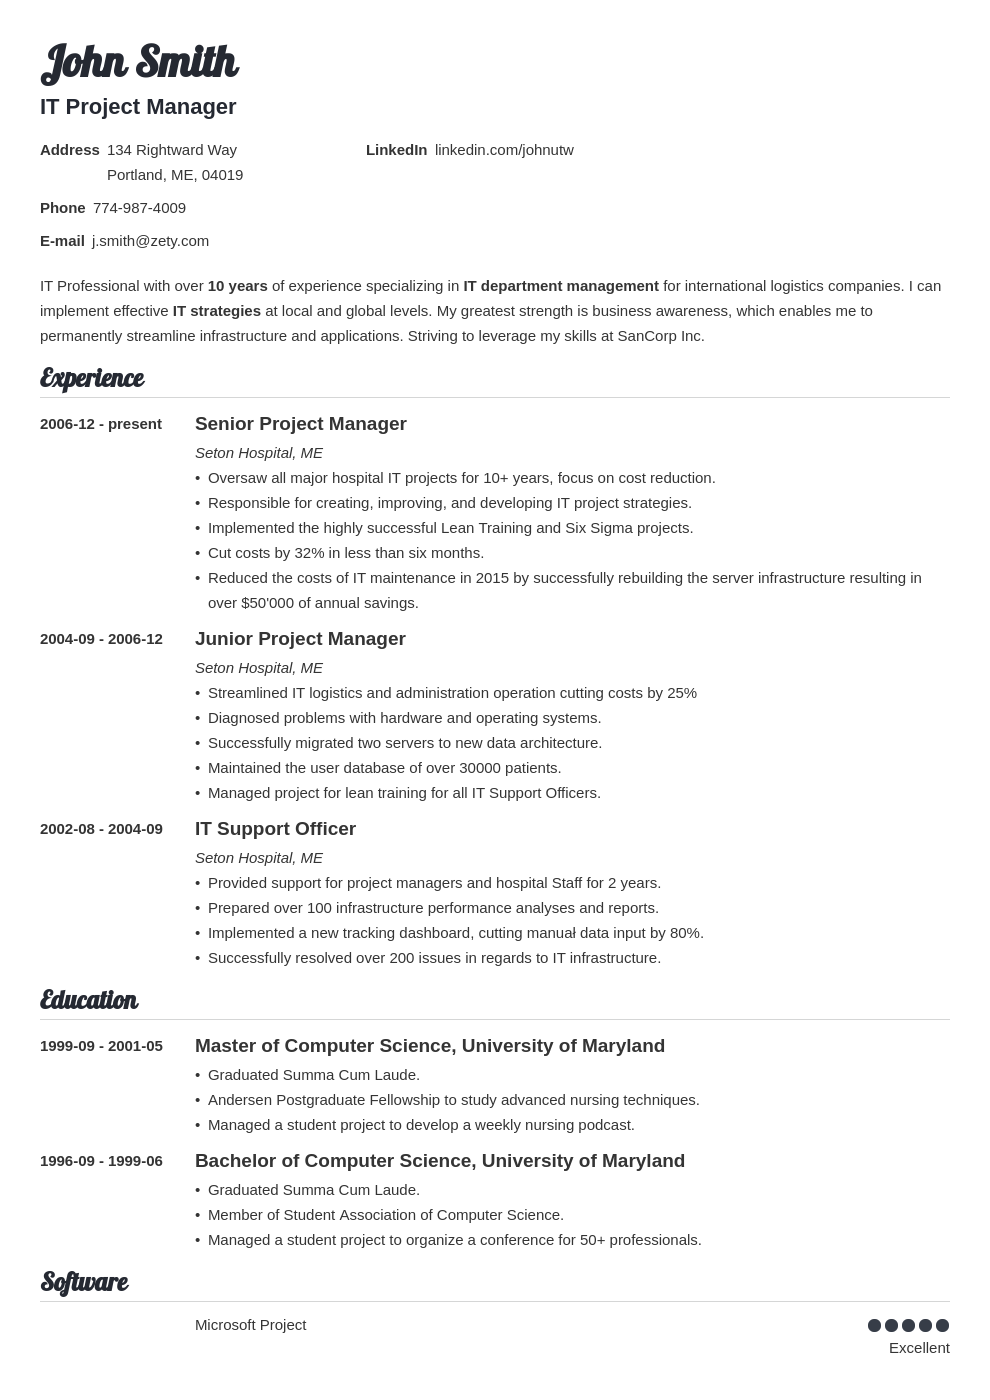 Professional CV Template Google Docs or Adobe. New 2022 Resume Template Easily editable with Word